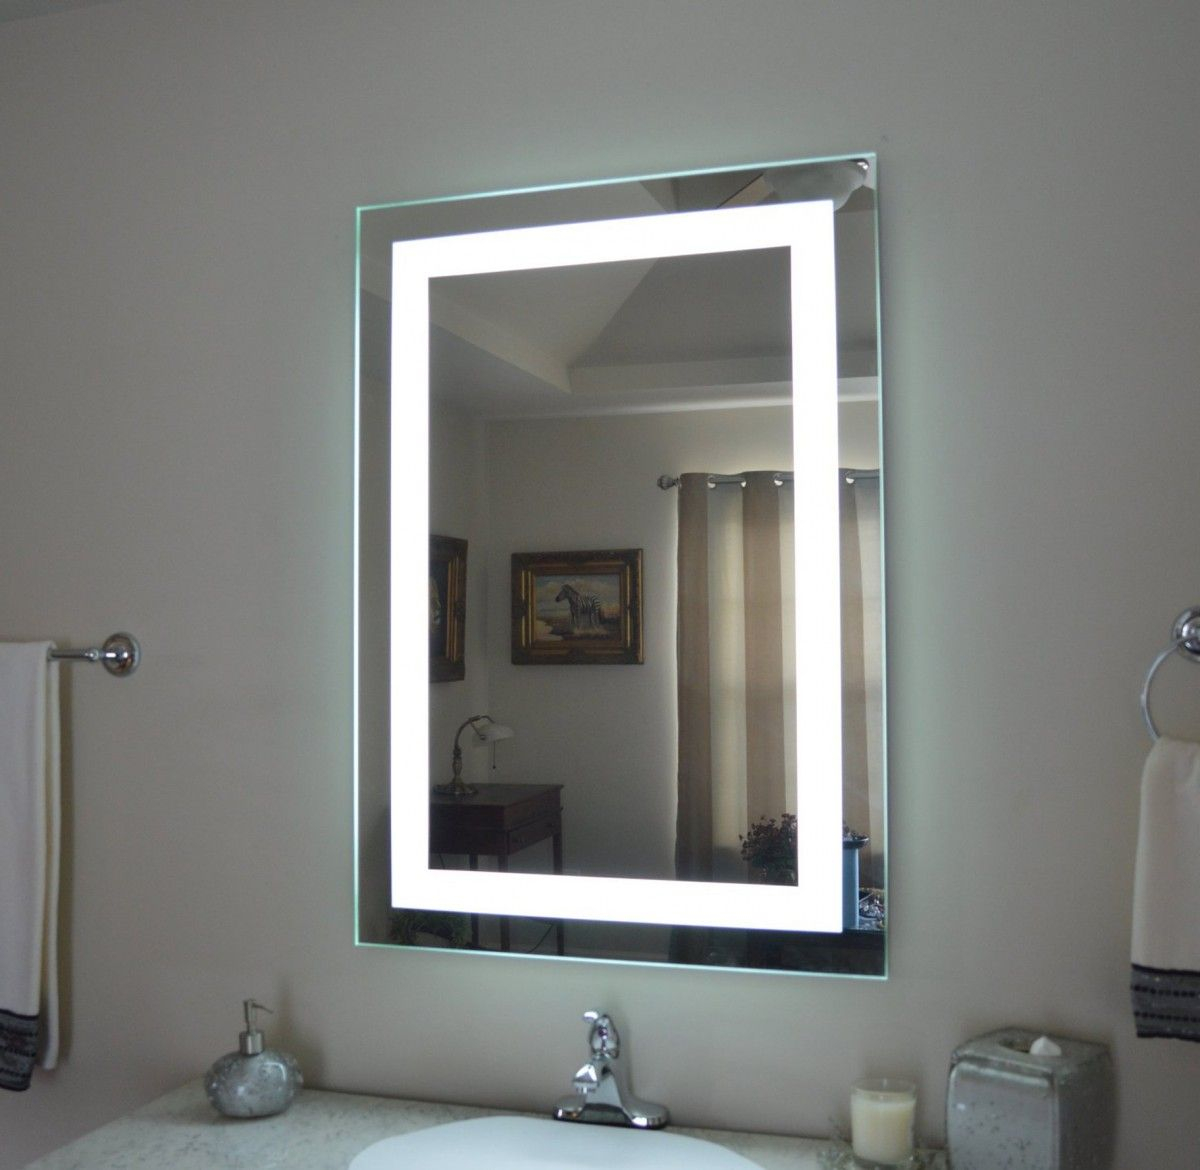 Bathroom Mirror With Light And Storage Master Bathroom Ideas throughout size 1200 X 1170